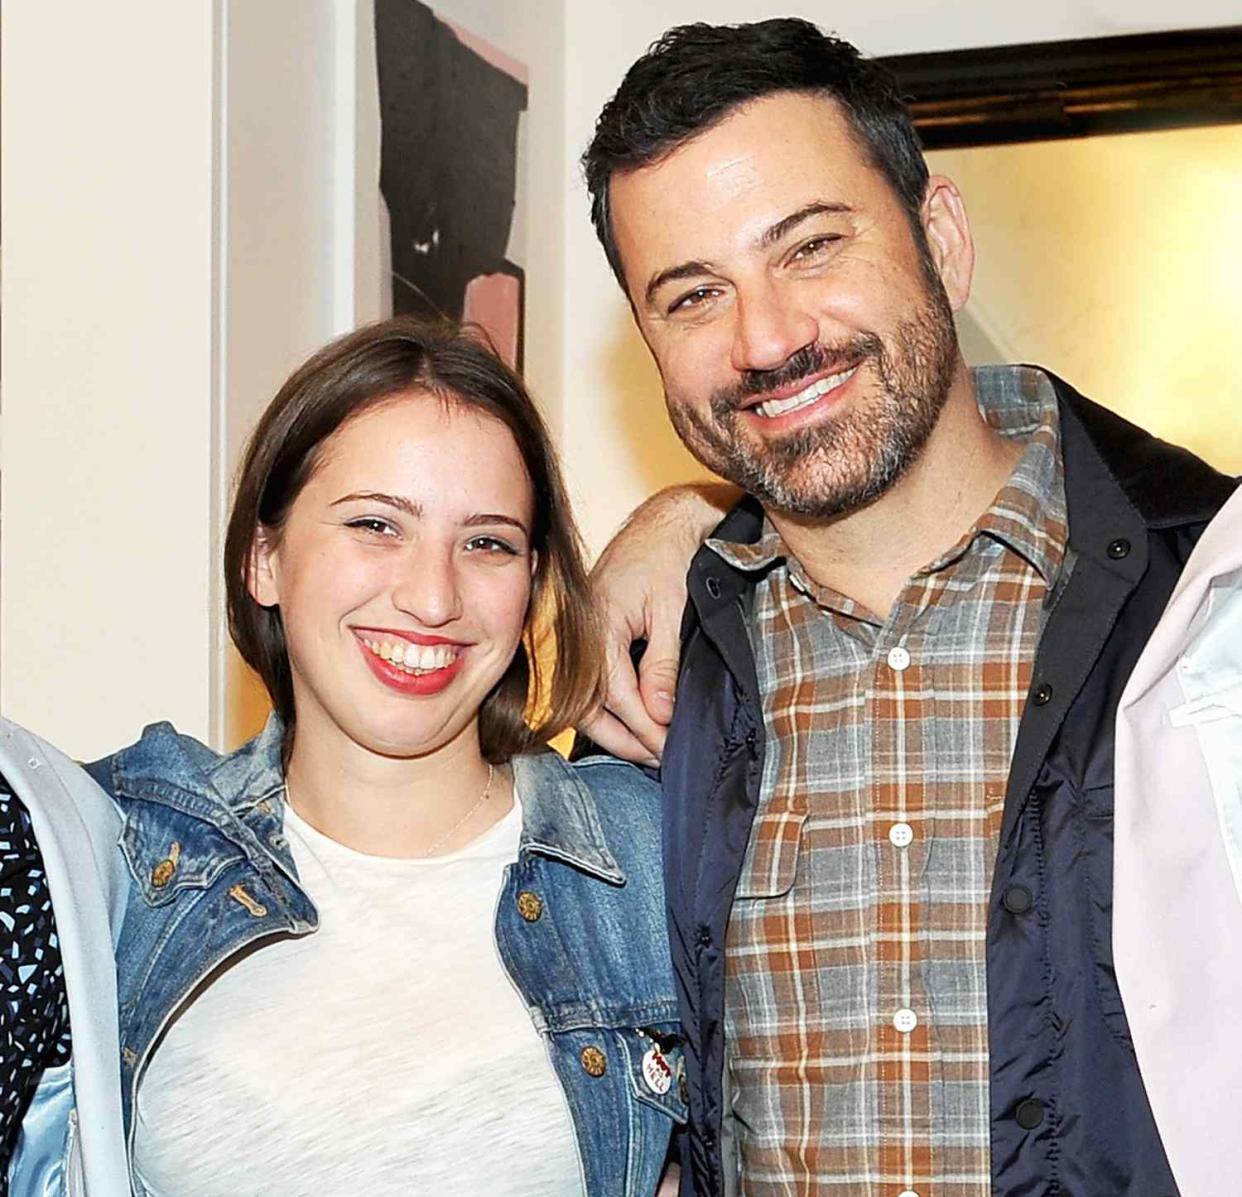 Jimmy Kimmel and daughter Katie Kimmel attend the opening of Consort on December 10, 2015 in Los Angeles, California.